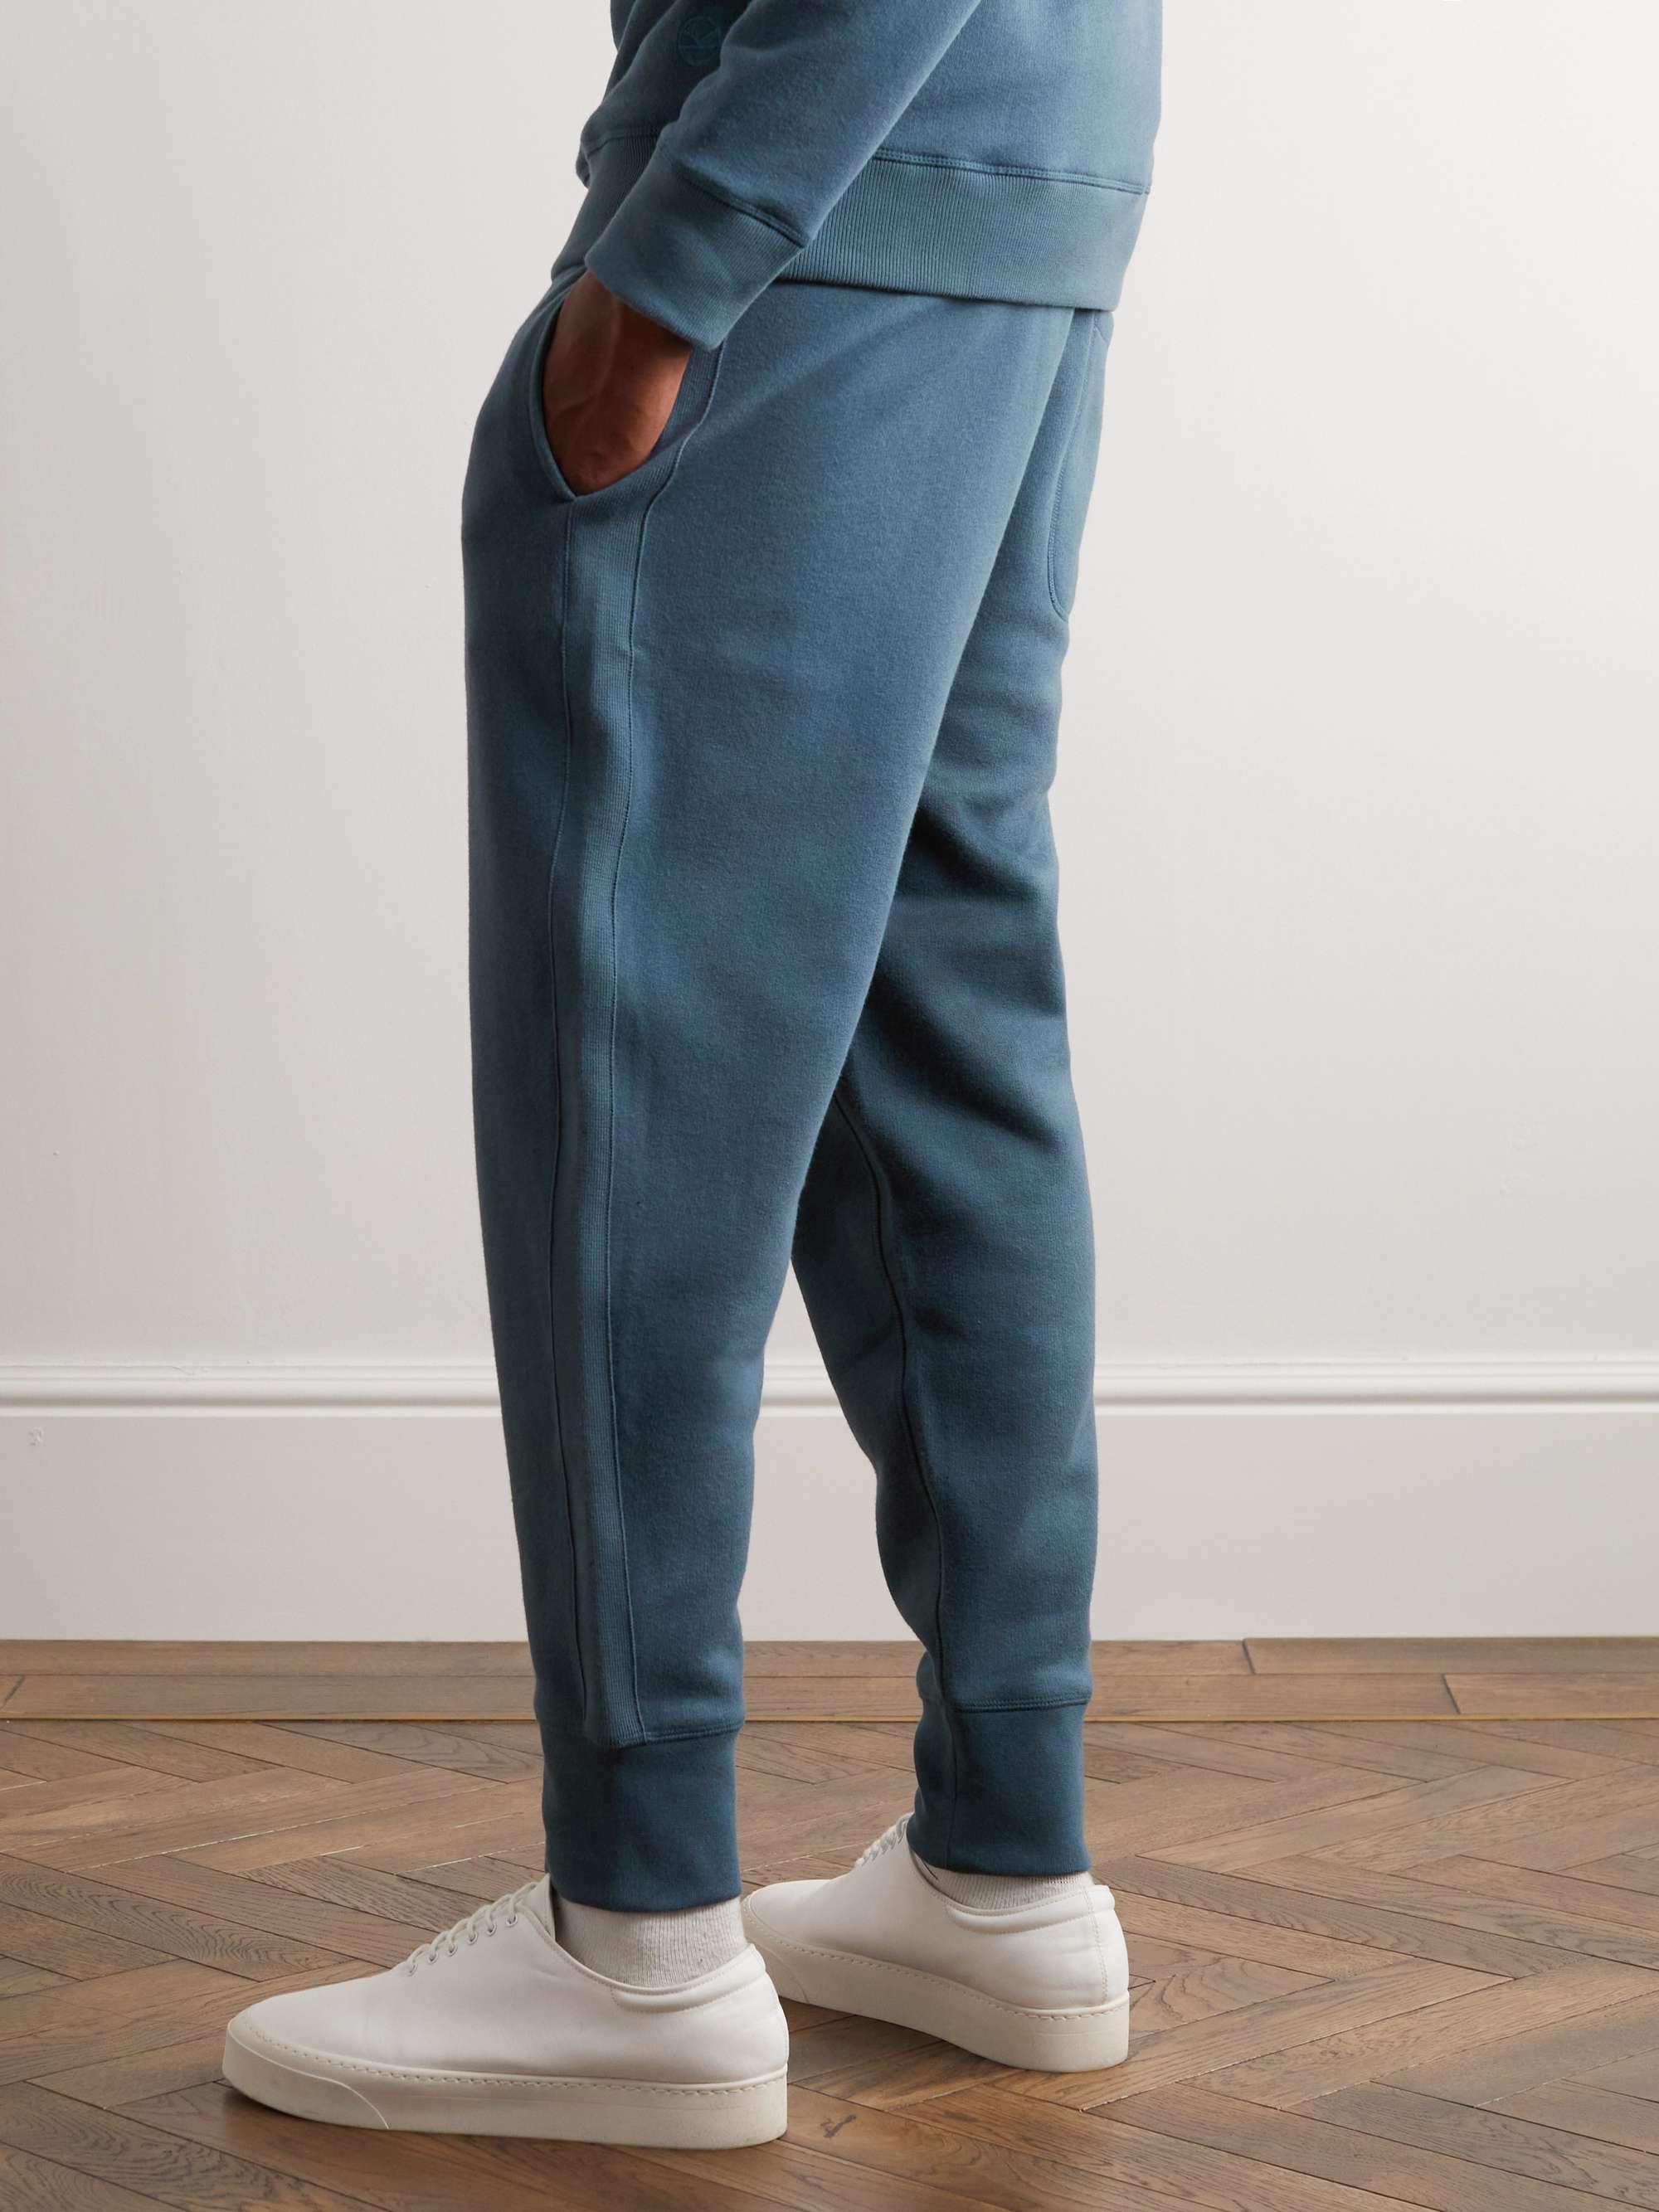 KINGSMAN Tapered Cotton and Cashmere-Blend Jersey Sweatpants